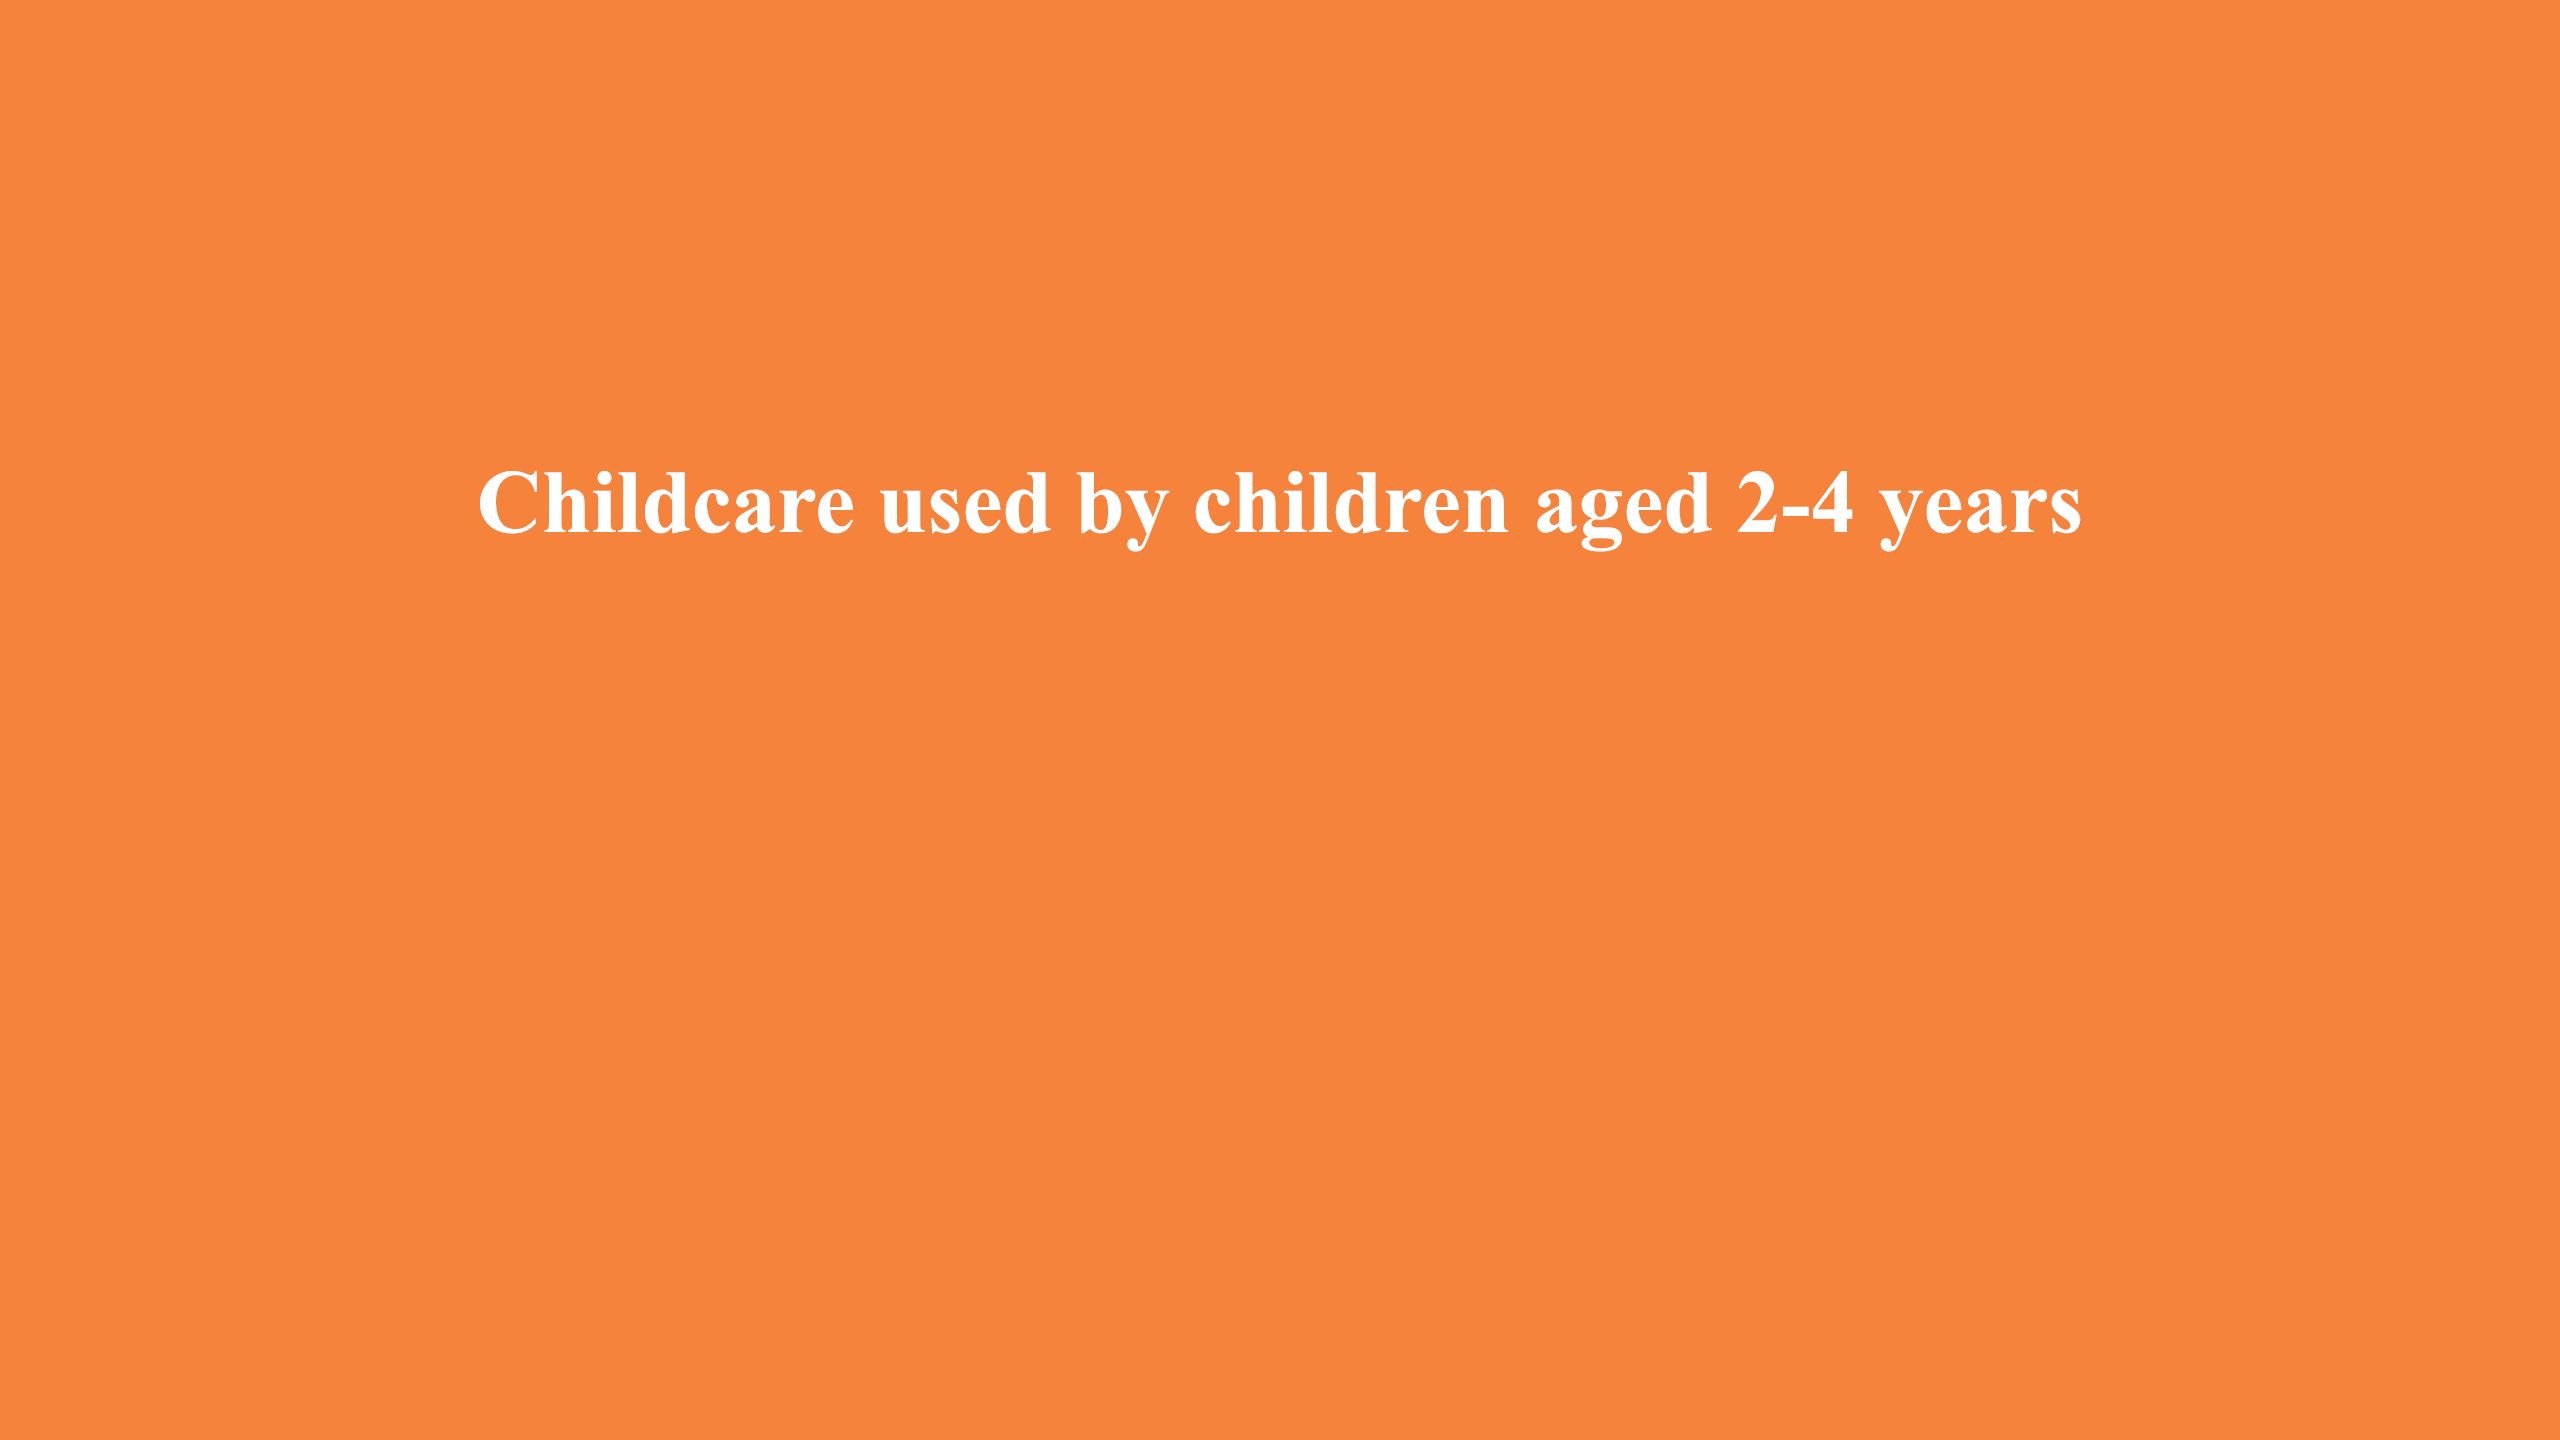 childcare used by children aged 2-4 years